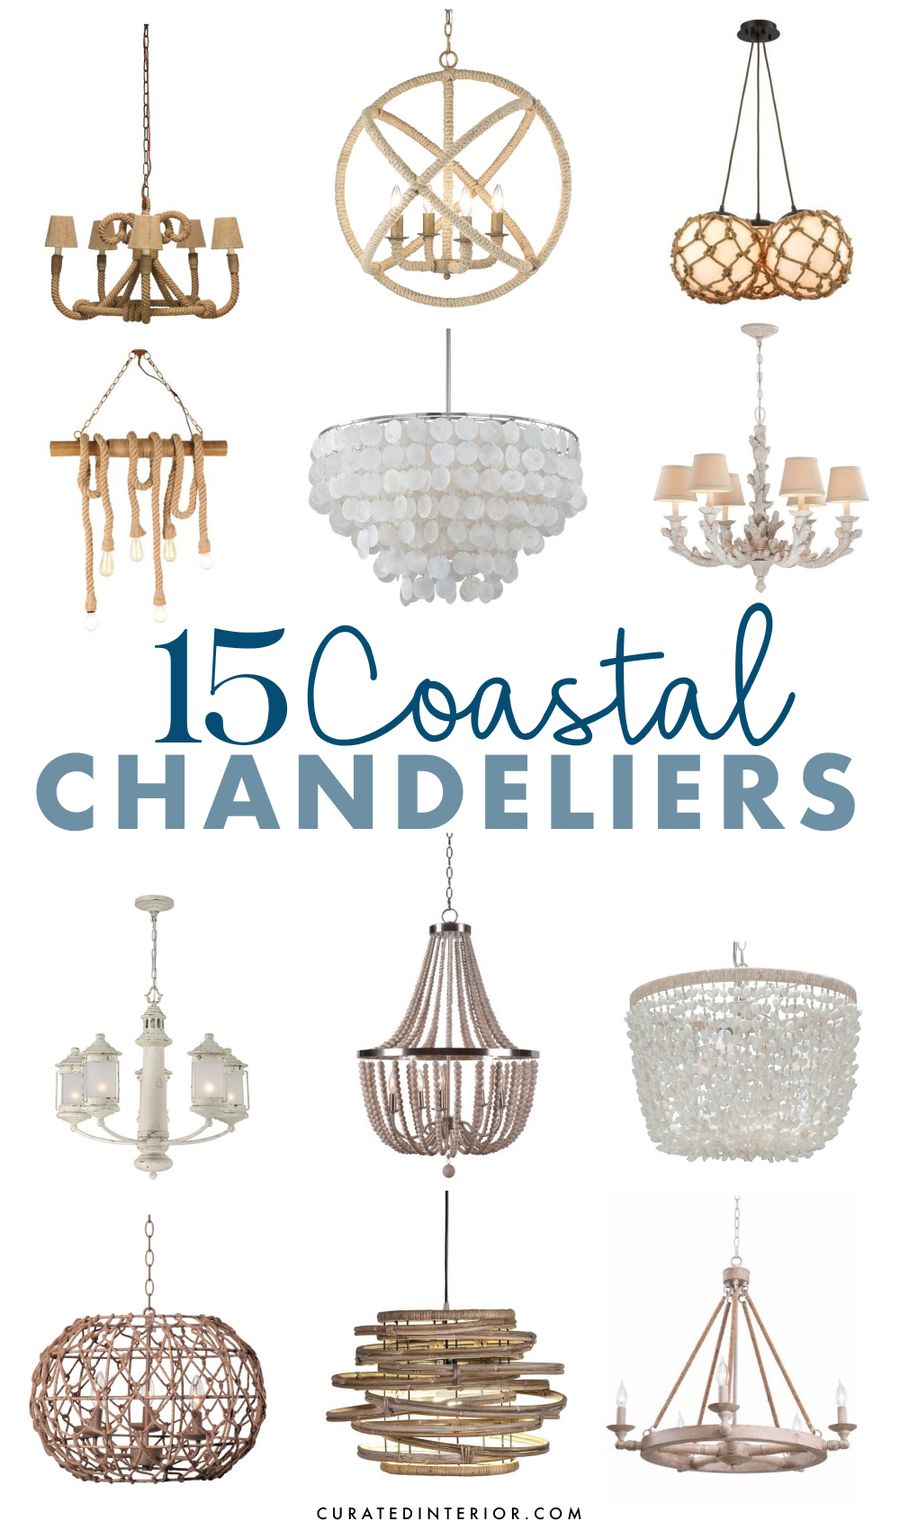 15 Coastal Chandeliers for Beach Homes